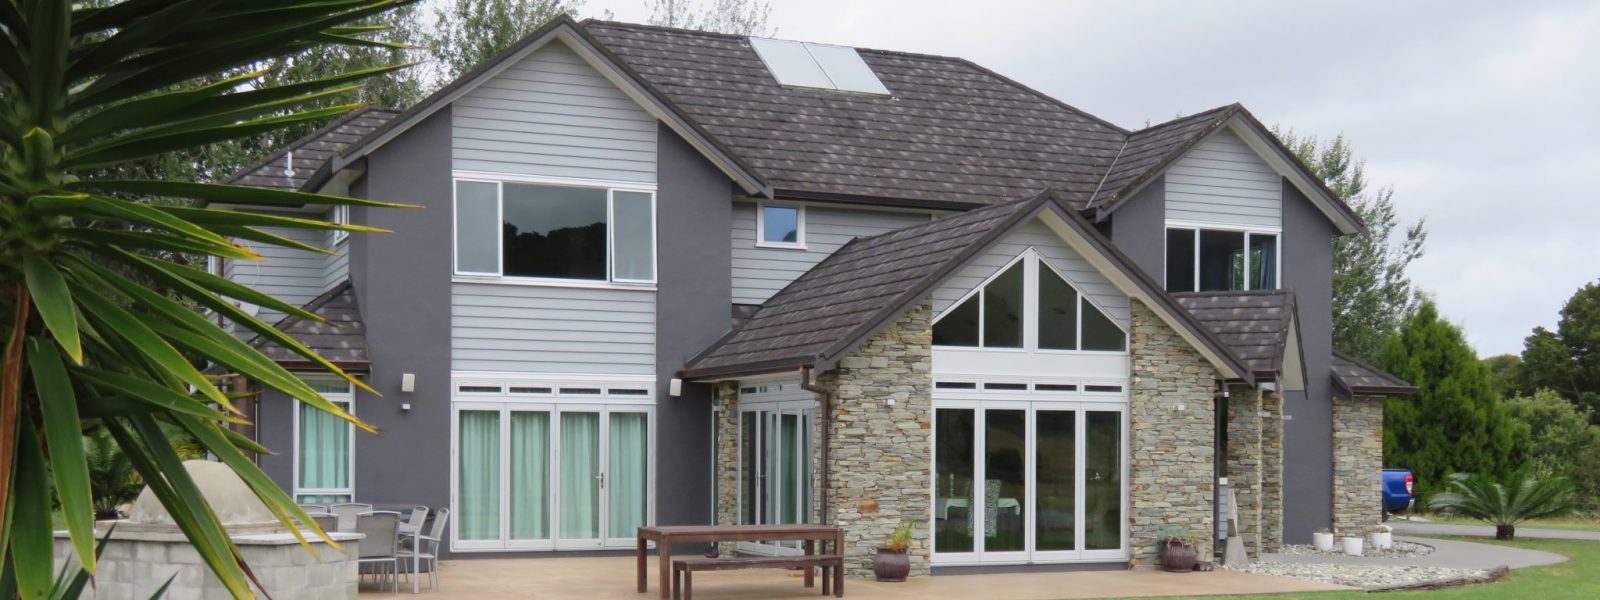 Residential Home Valuation - Header Image